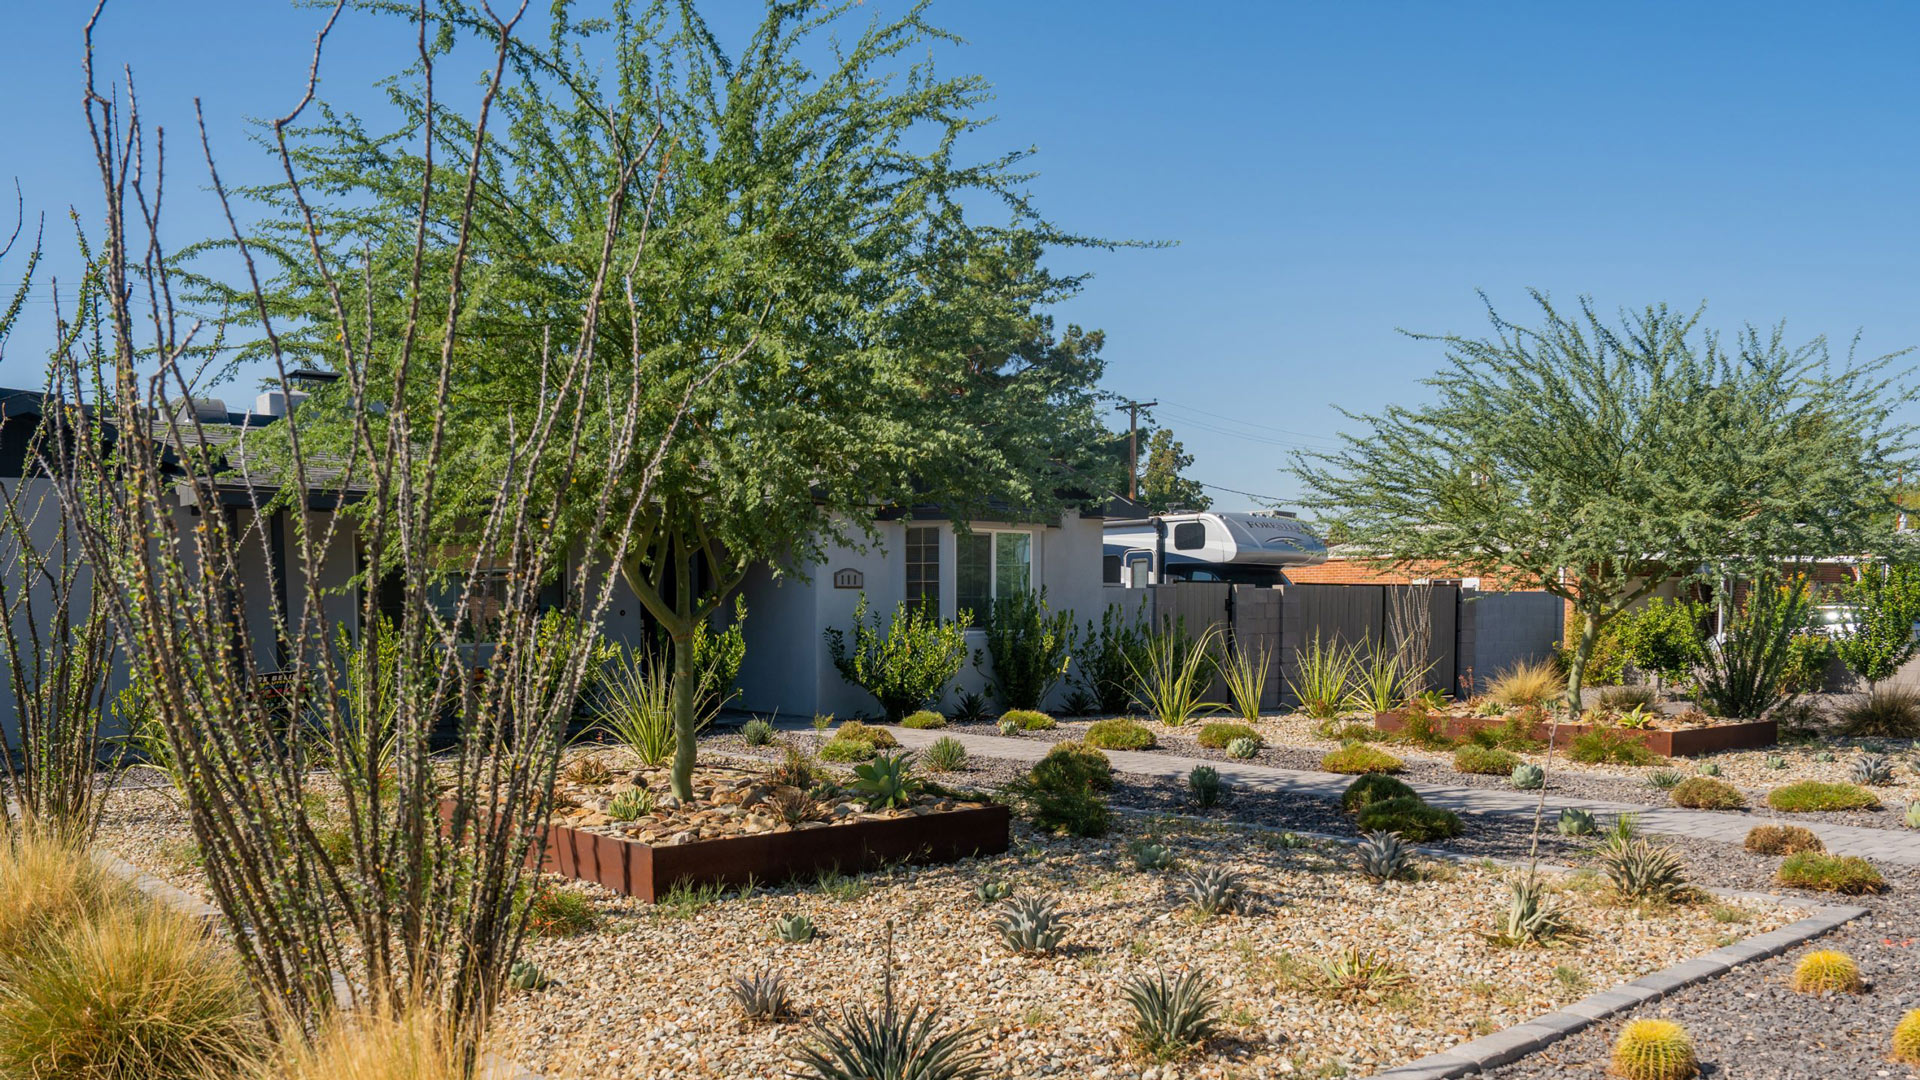 As the drought grinds on, Maricopa County homeowners take advantage of xeriscape incentives